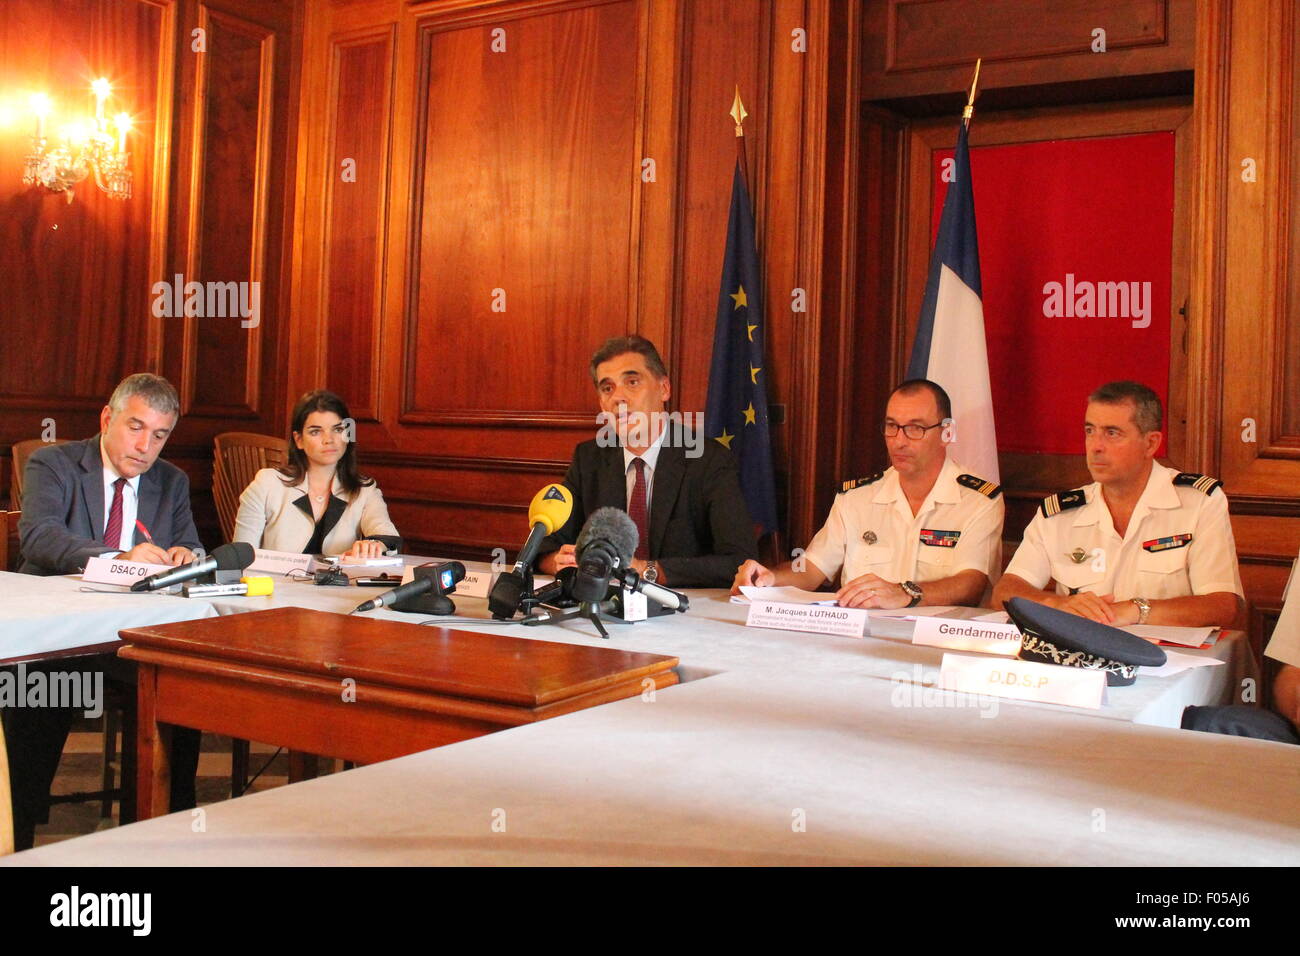 Reunion Island, France. 7th Aug, 2015. Dominique Sorain (C), La Reunion's administrator, talks to media during a press conference on search plan for MH370 debris in Reunion Island, on Aug. 7, 2015. Authority of France's oversea island La Reunion has confirmed the plan of search for more MH370 parts and said the search will last for at least one week. Credit:  Romain Latournerie/Xinhua/Alamy Live News Stock Photo